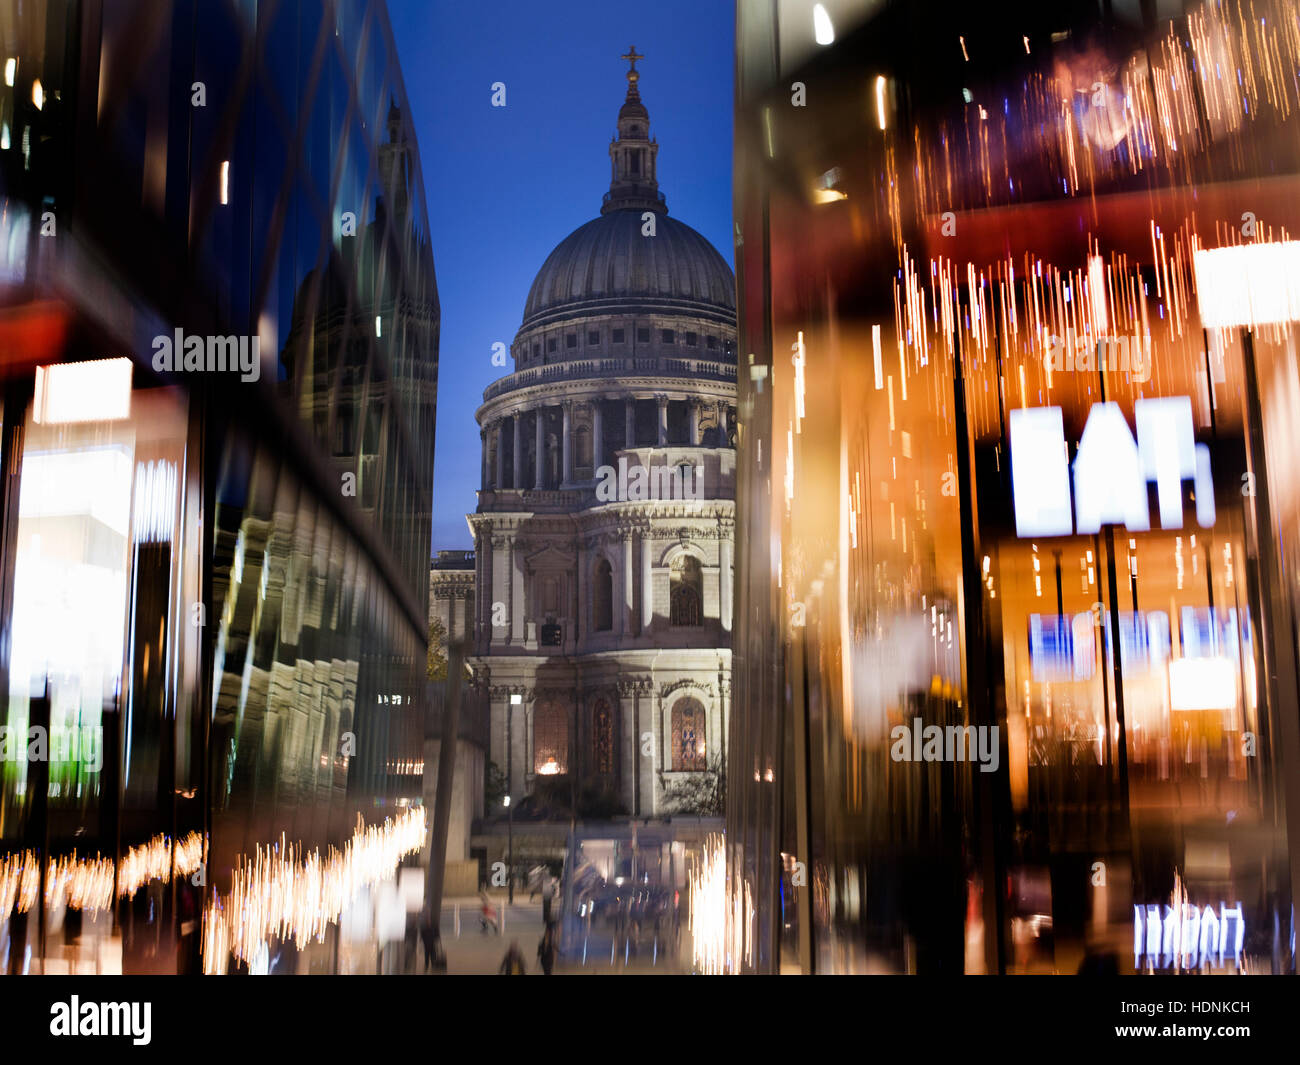 St Paul's Cathedral surrounded by neon shop signs Stock Photo